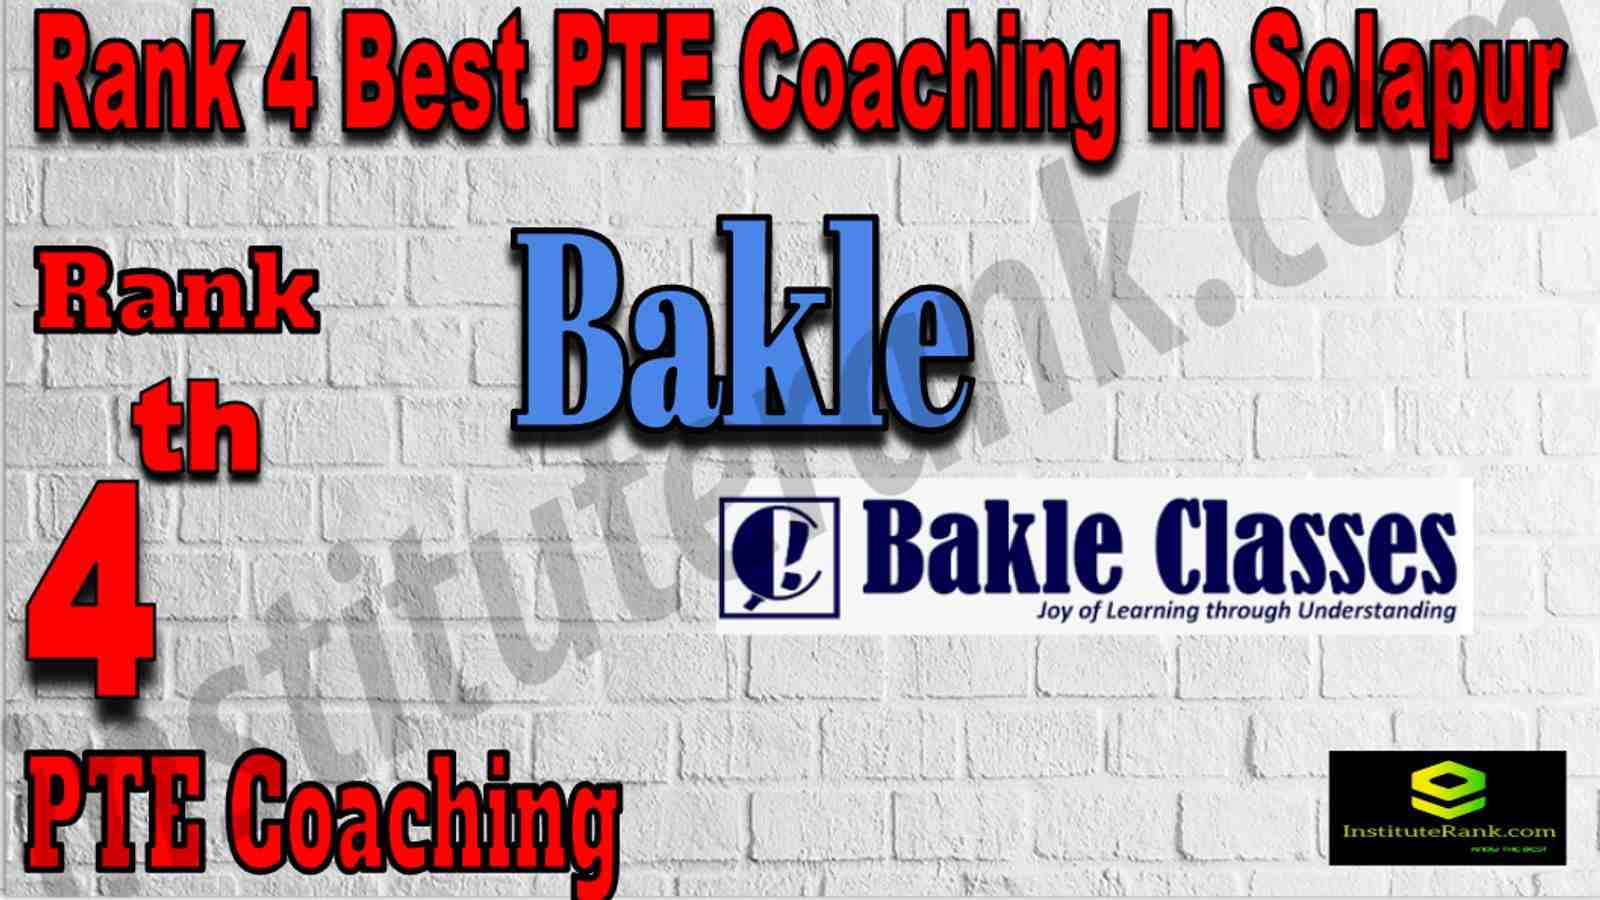 4th Best PTE Coaching In Solapur